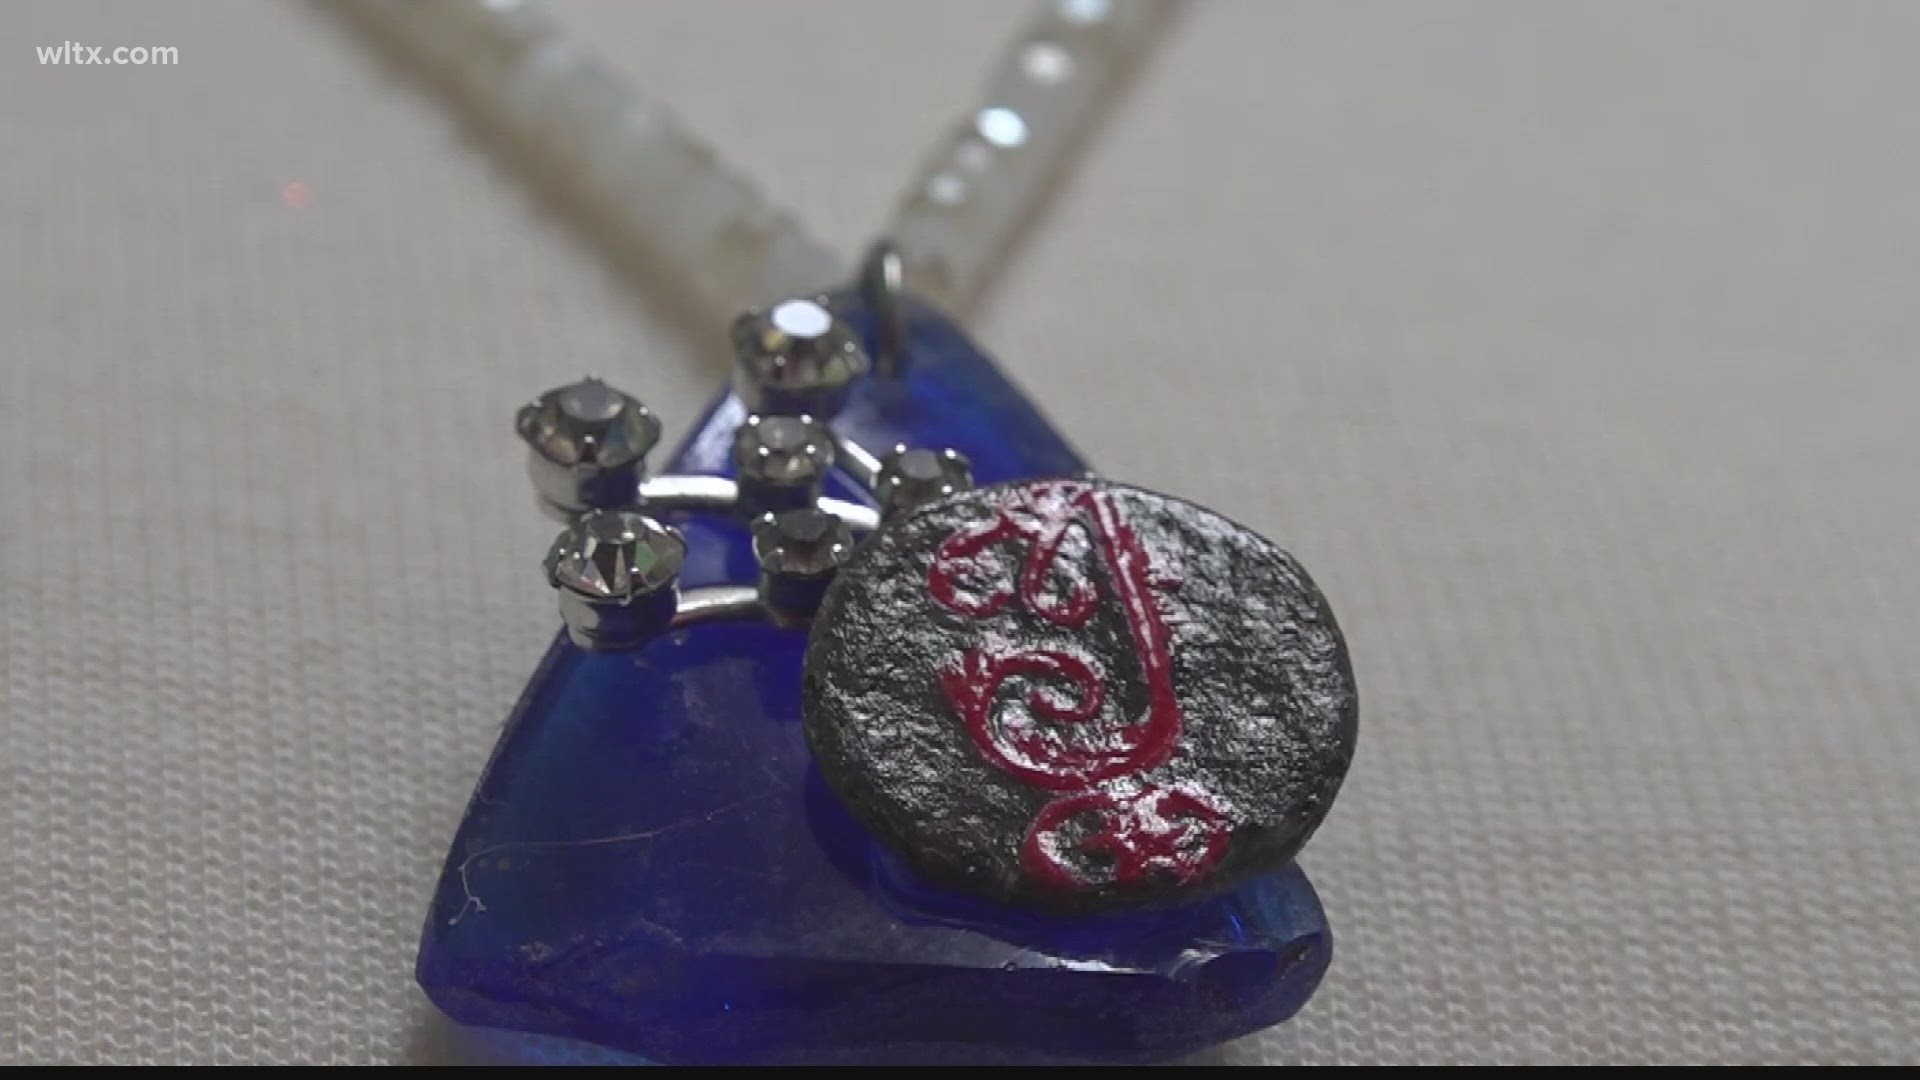 A Sumter woman is getting national attention after a necklace she created earned her first place in the American Heritage Beaded Jewelry Contest.